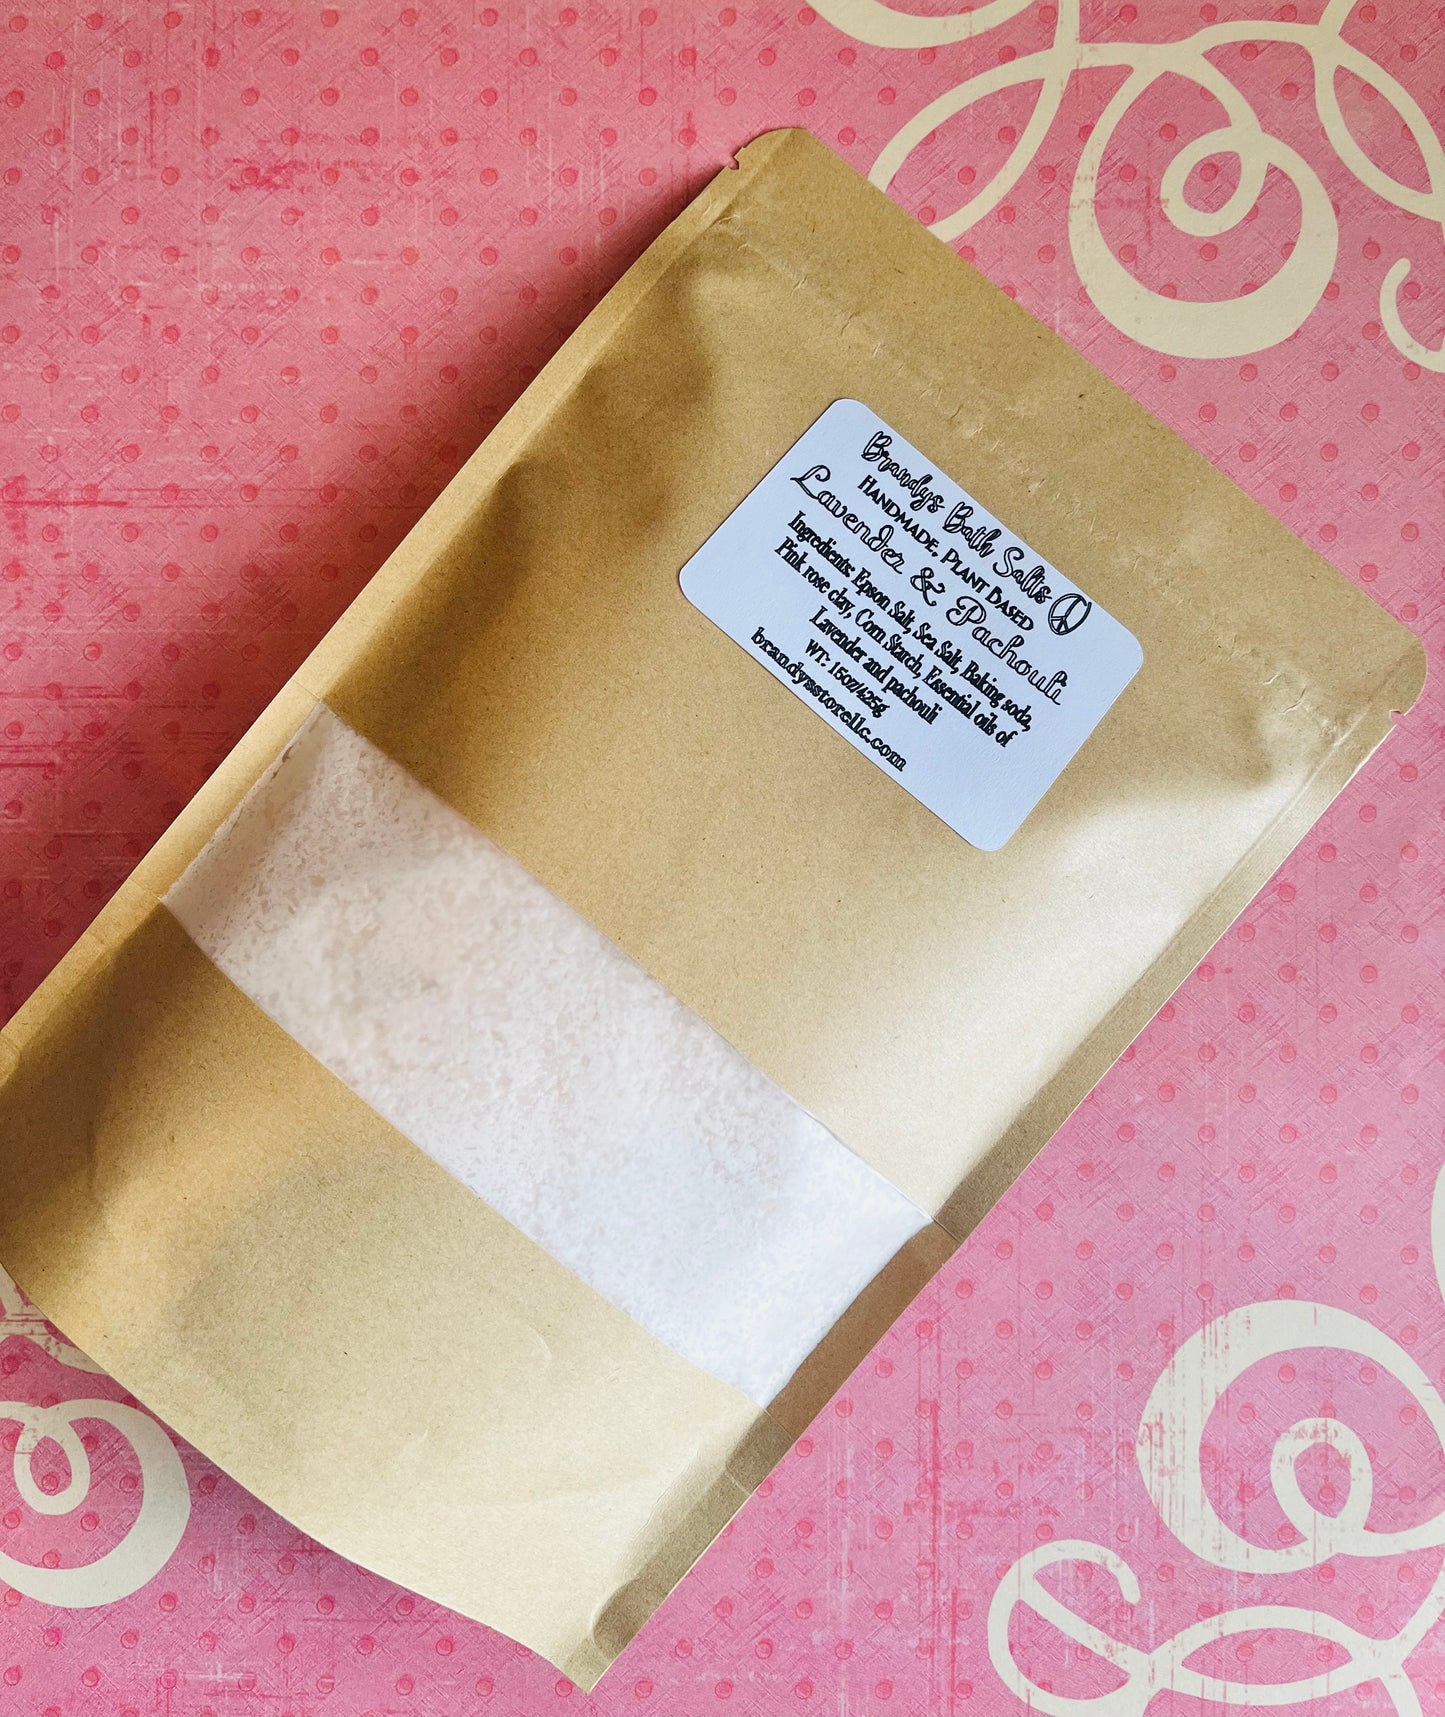 Lavender & Patchouli Bath Salts (with pink rose clay)